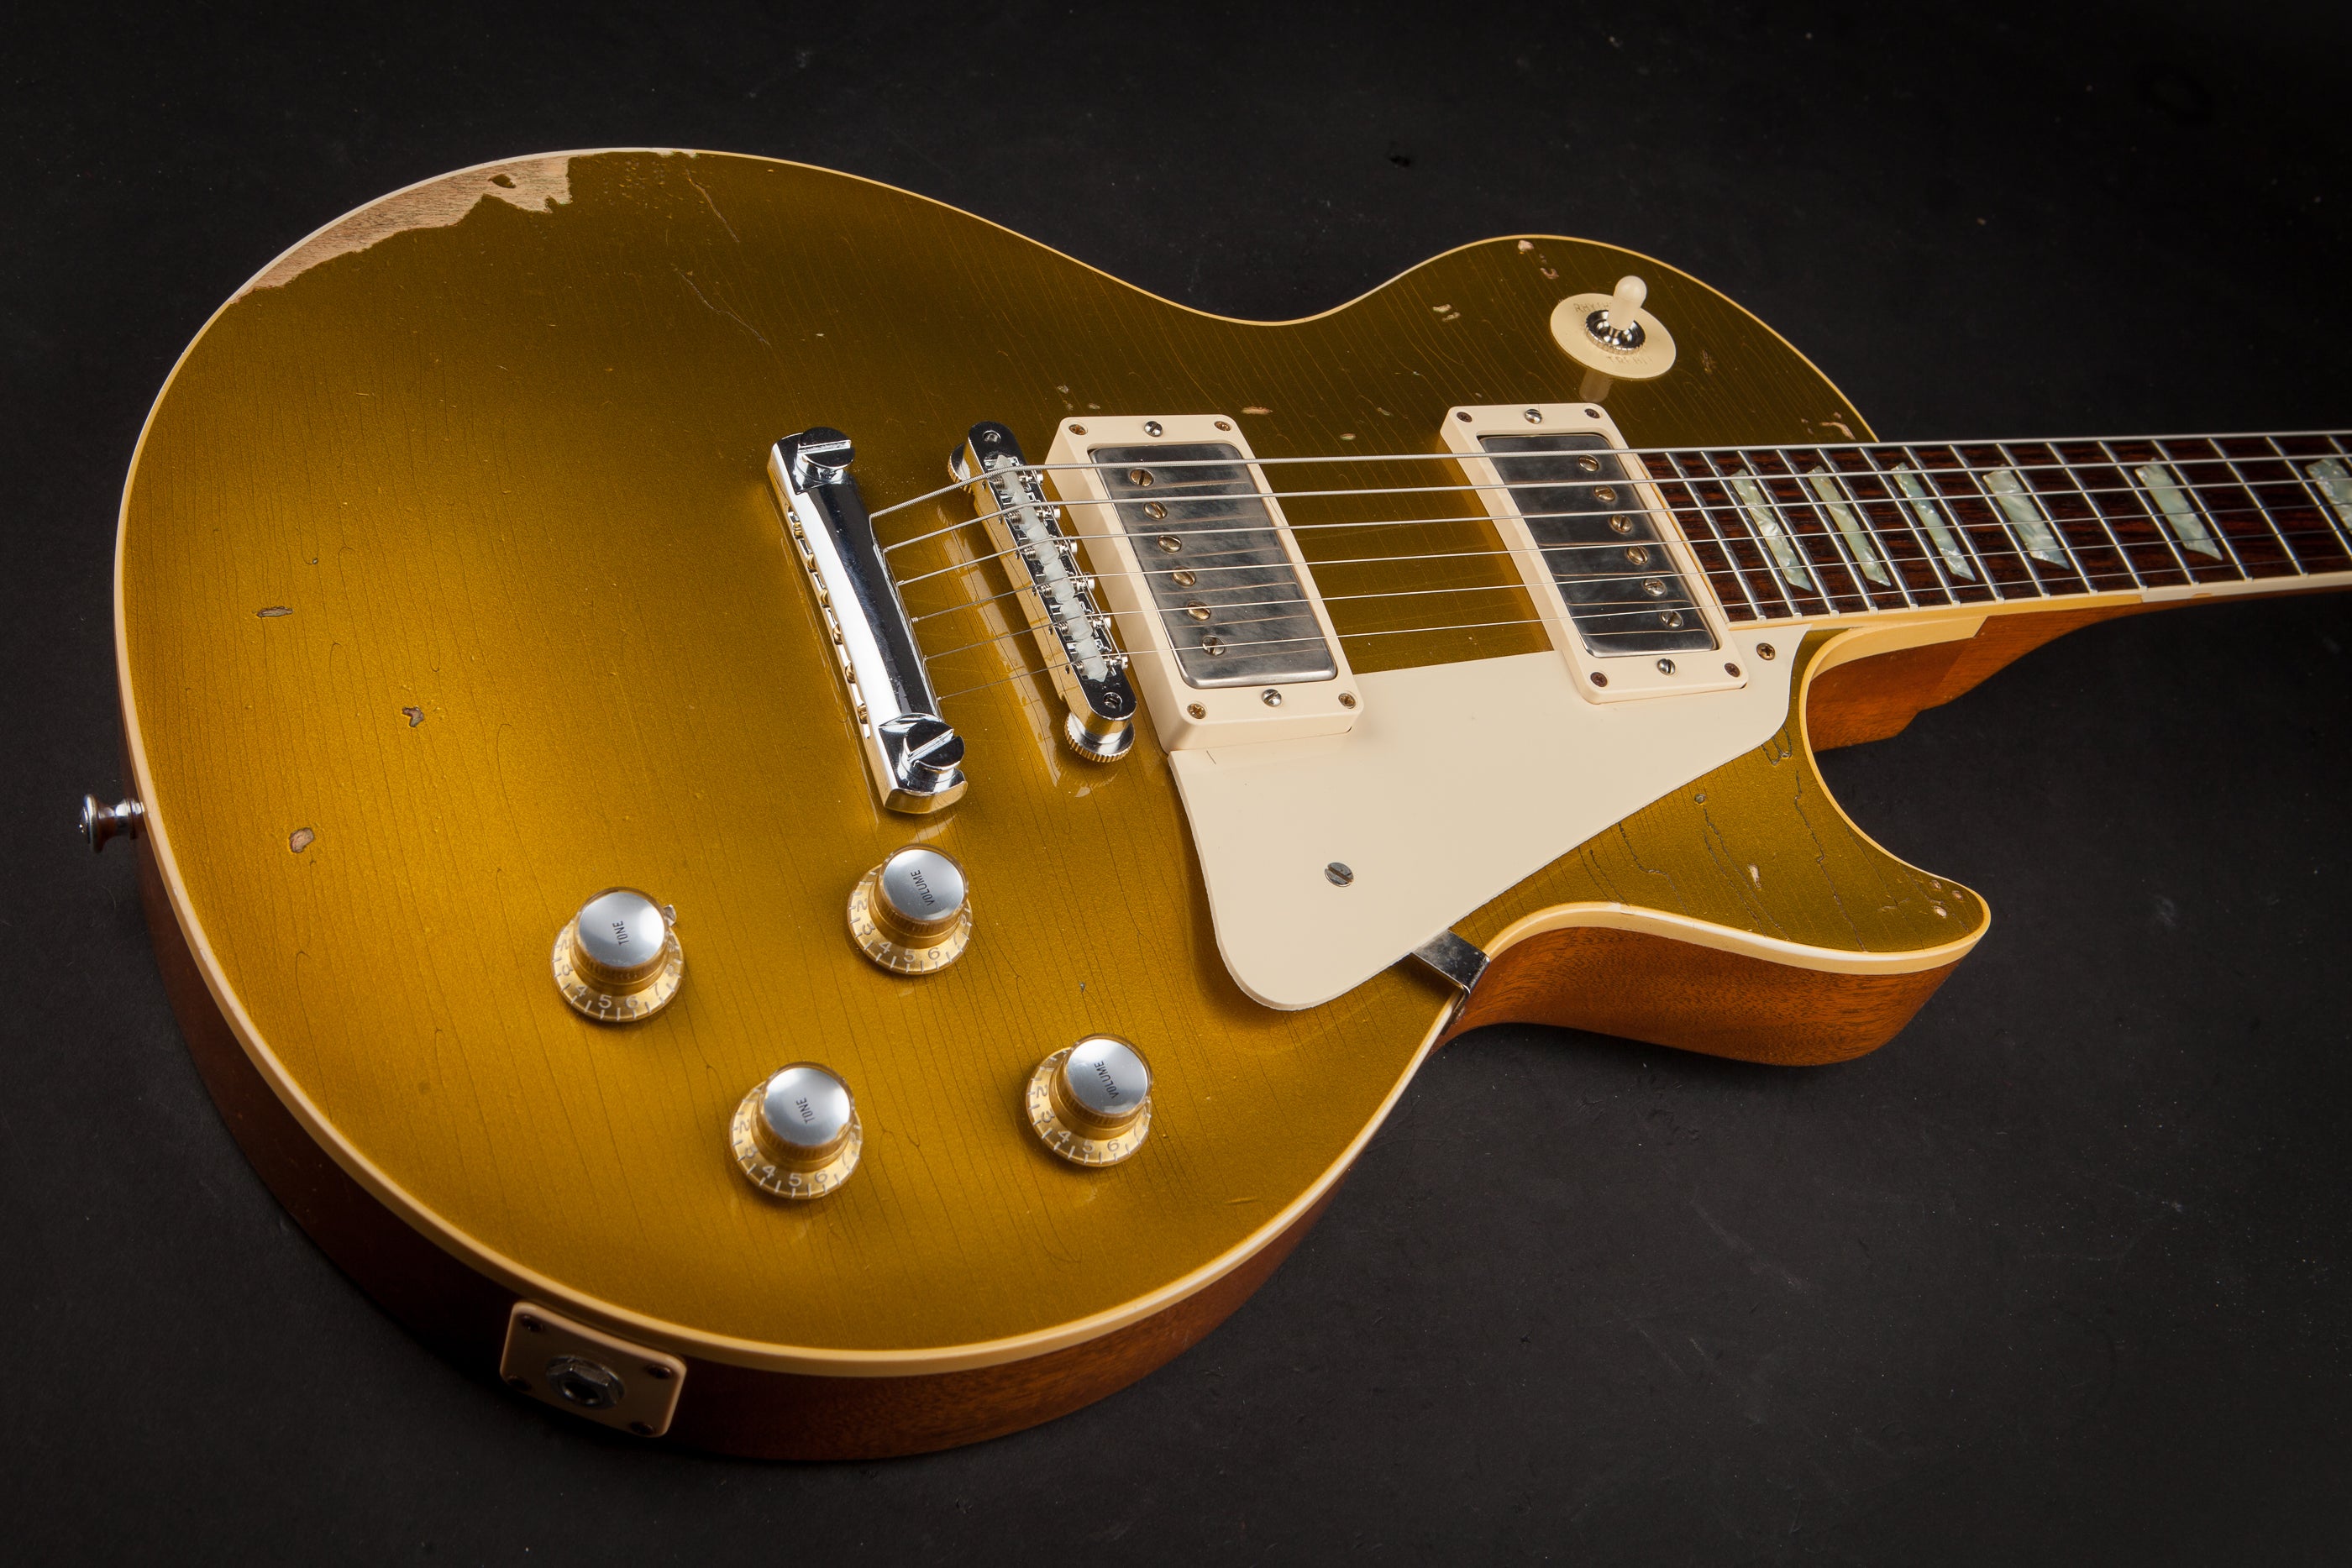 Gibson Custom Shop: 68 Les Paul Standard "In House" Heavy Aged Goldtop #085278